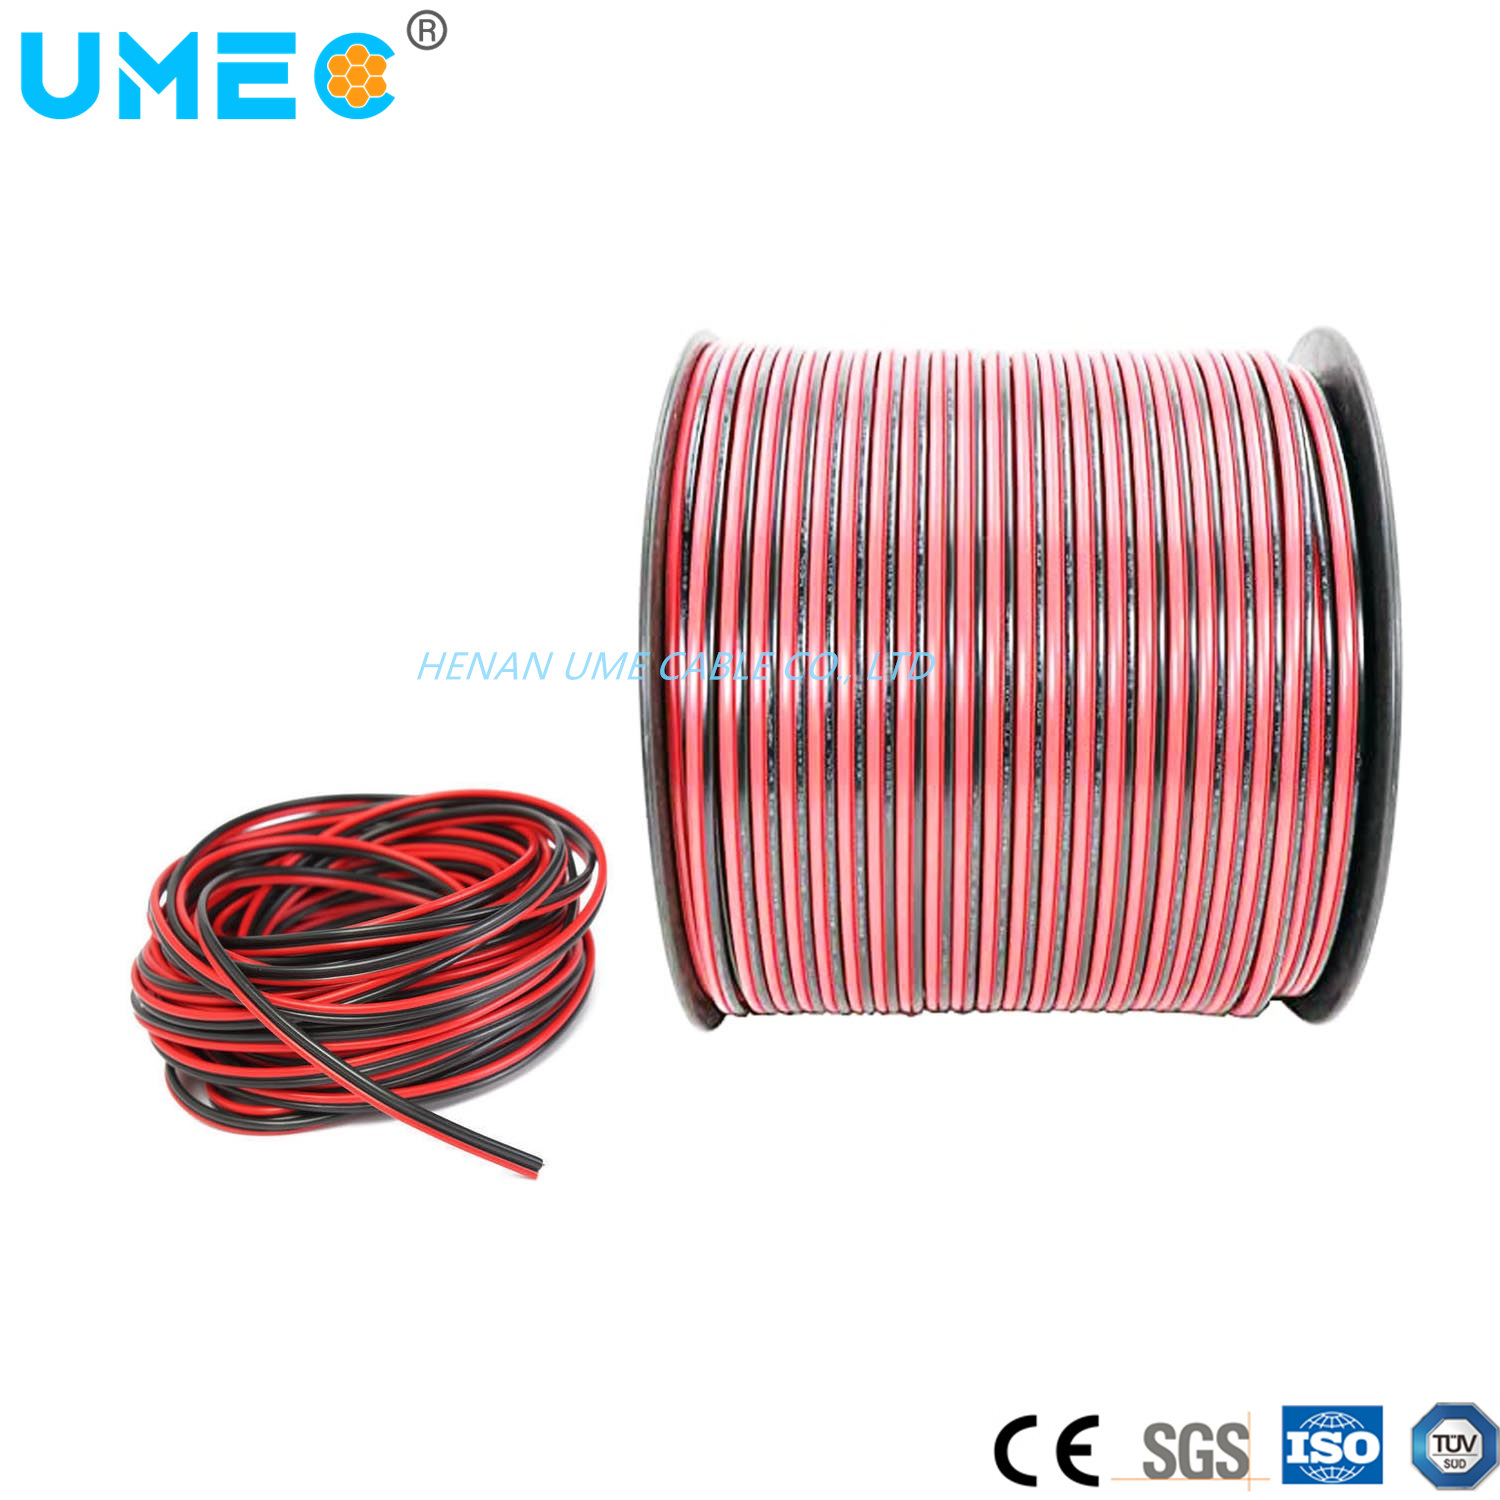 Made in China 300/500V Thermoplastic PVC Cable Spt-1 Spt-2 Spt-3 2X10AWG 2X12AWG 2X14AWG 2X16AWG 2X18AWG Twin Cable